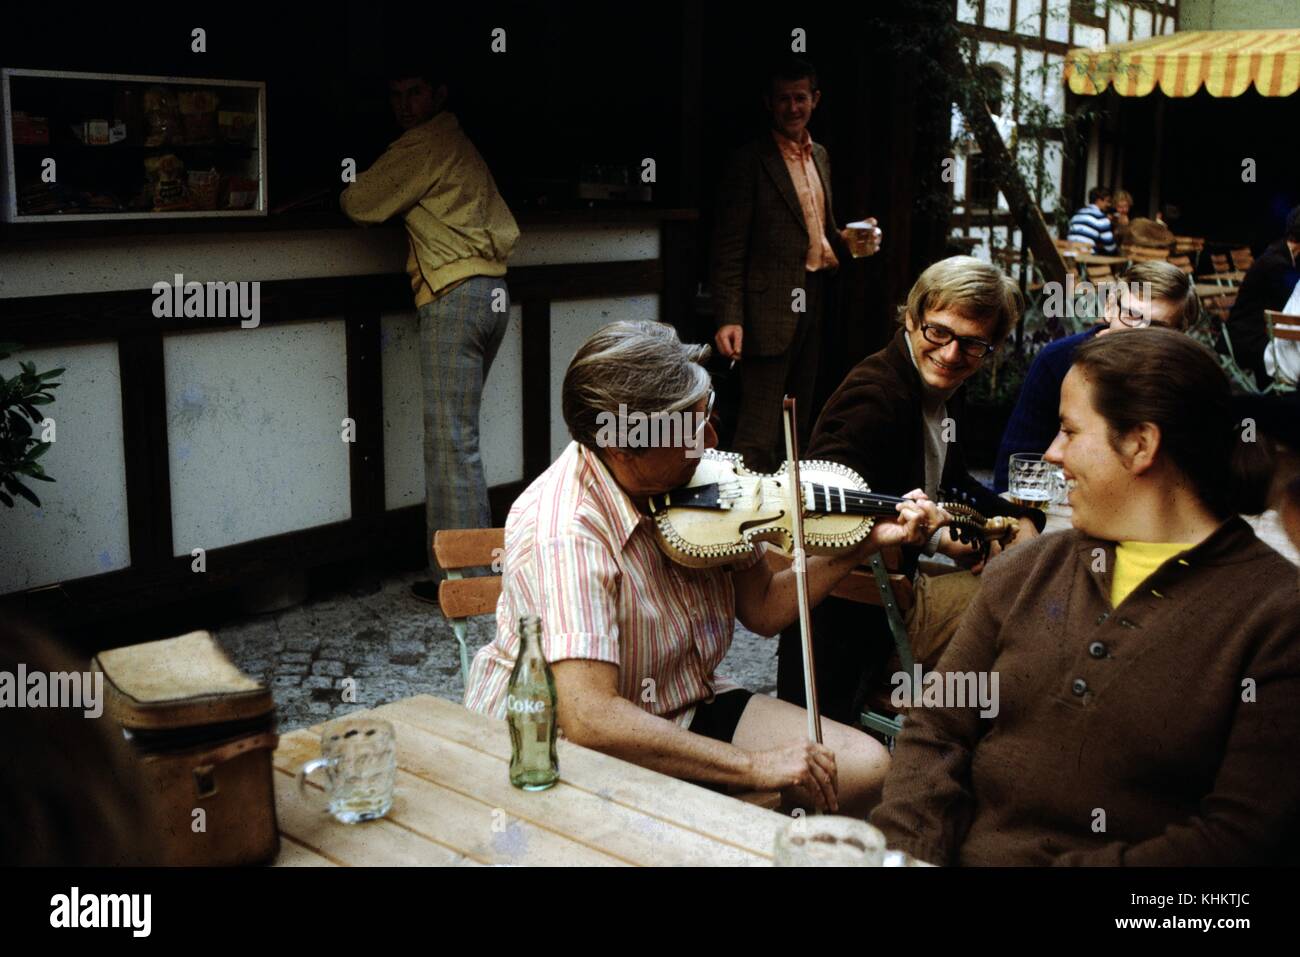 Woman playing a fiddle in a cafe, empty bottle of Coca Cola visible, Ireland, 1960. Stock Photo